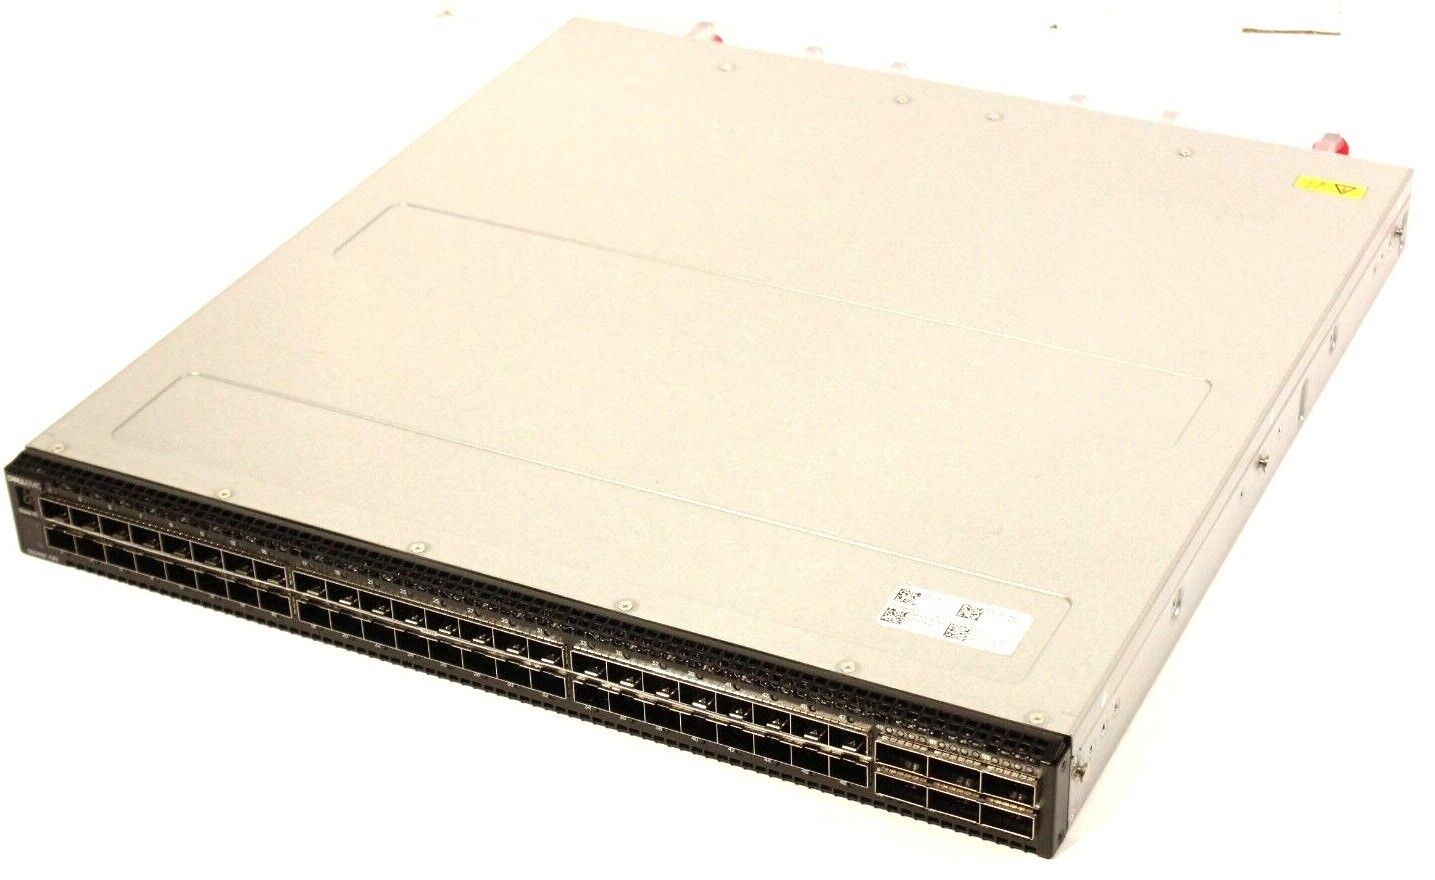 S5048F-ON Dell EMC Networking E21W 25GbE Switch I/O Panel to PSU Airflow 82VTG 